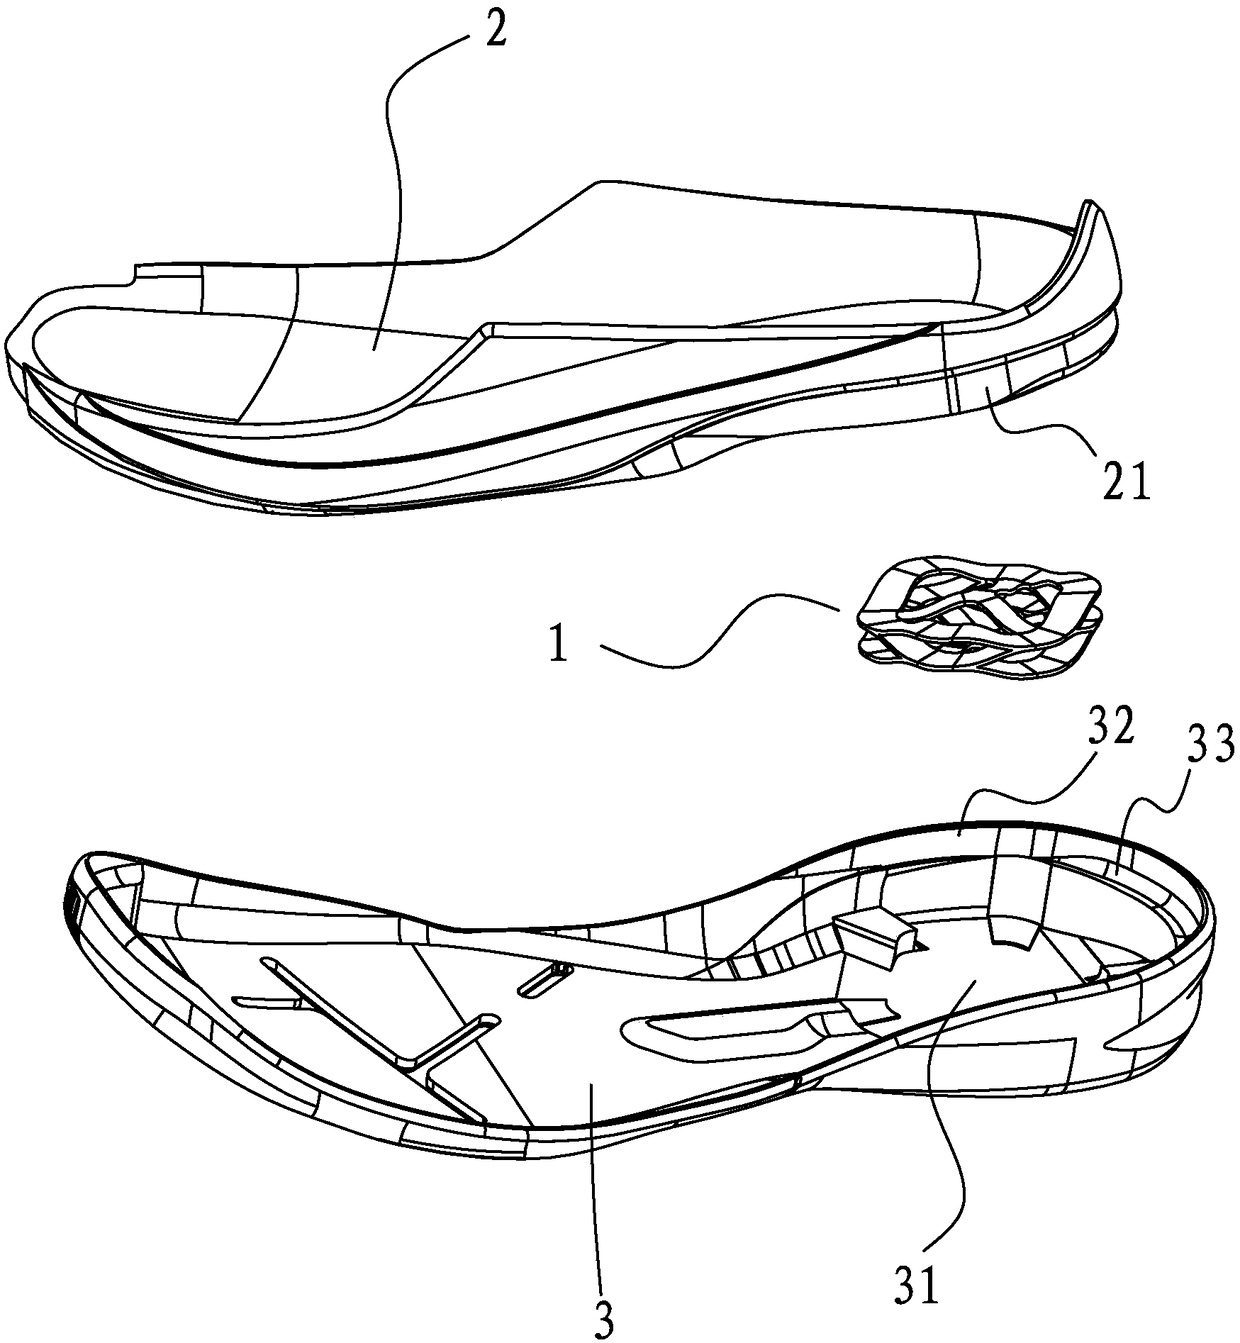 A kind of honeycomb damping device and shoe sole